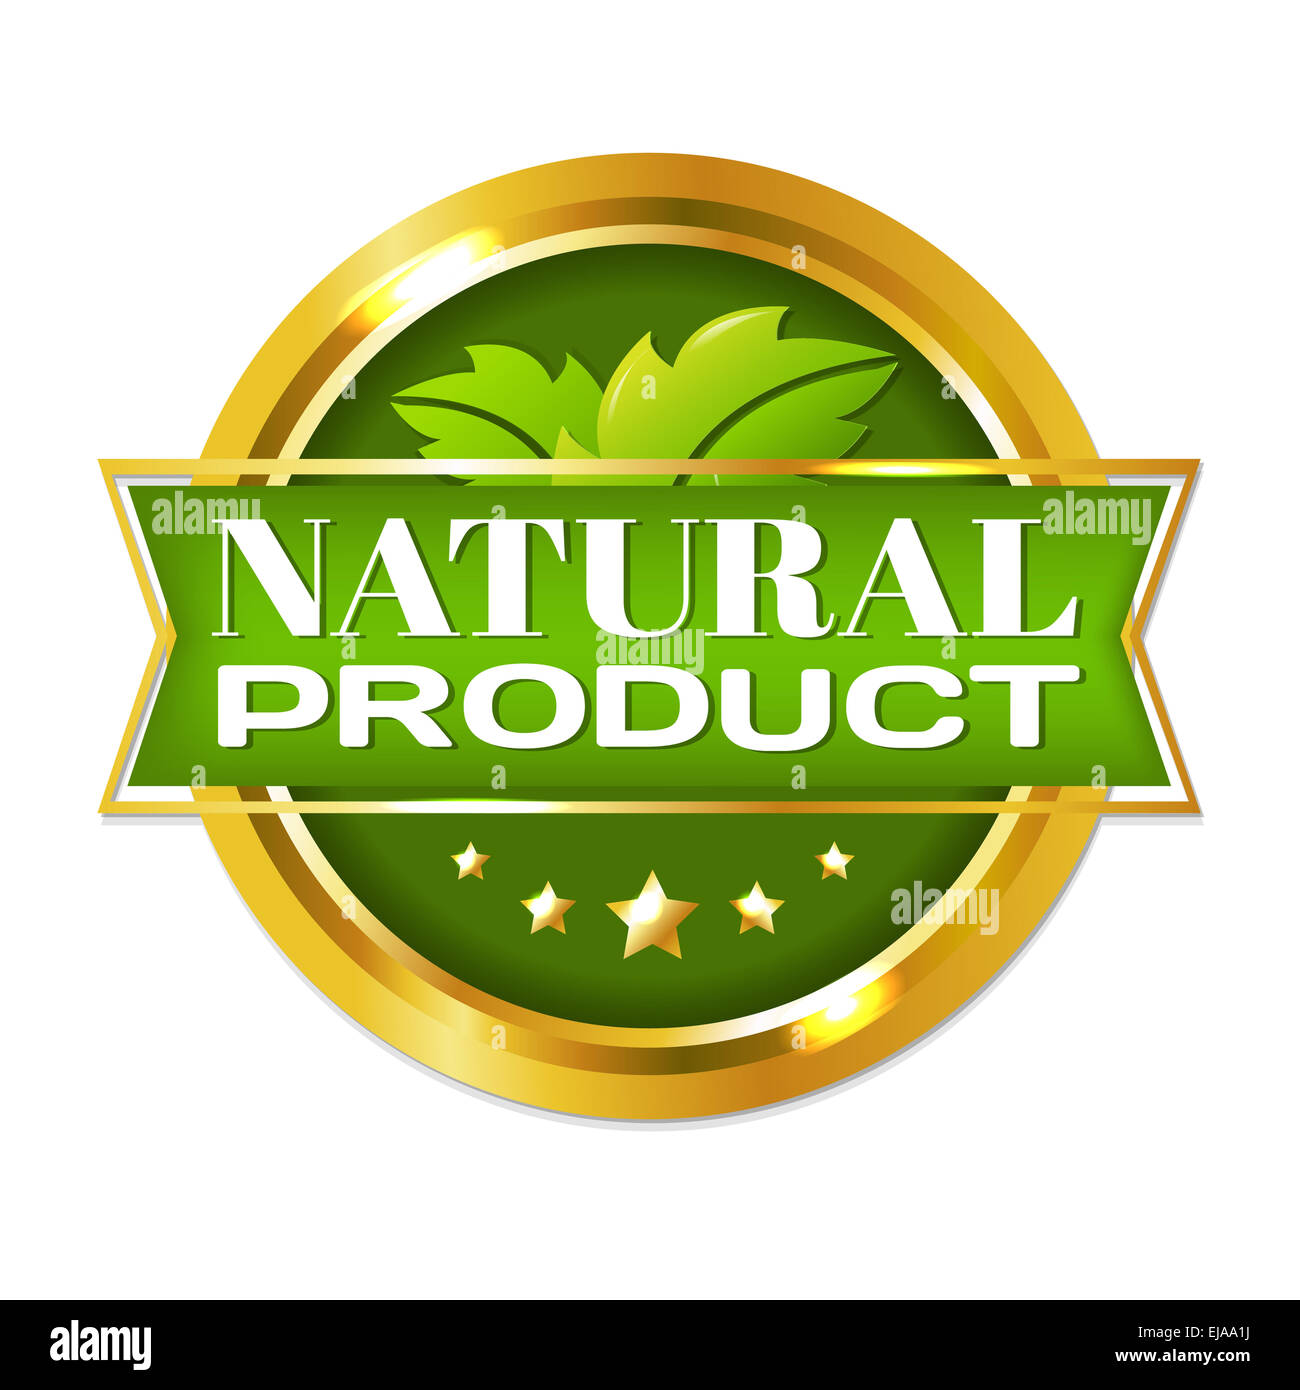 Natural Product Label Stock Photo